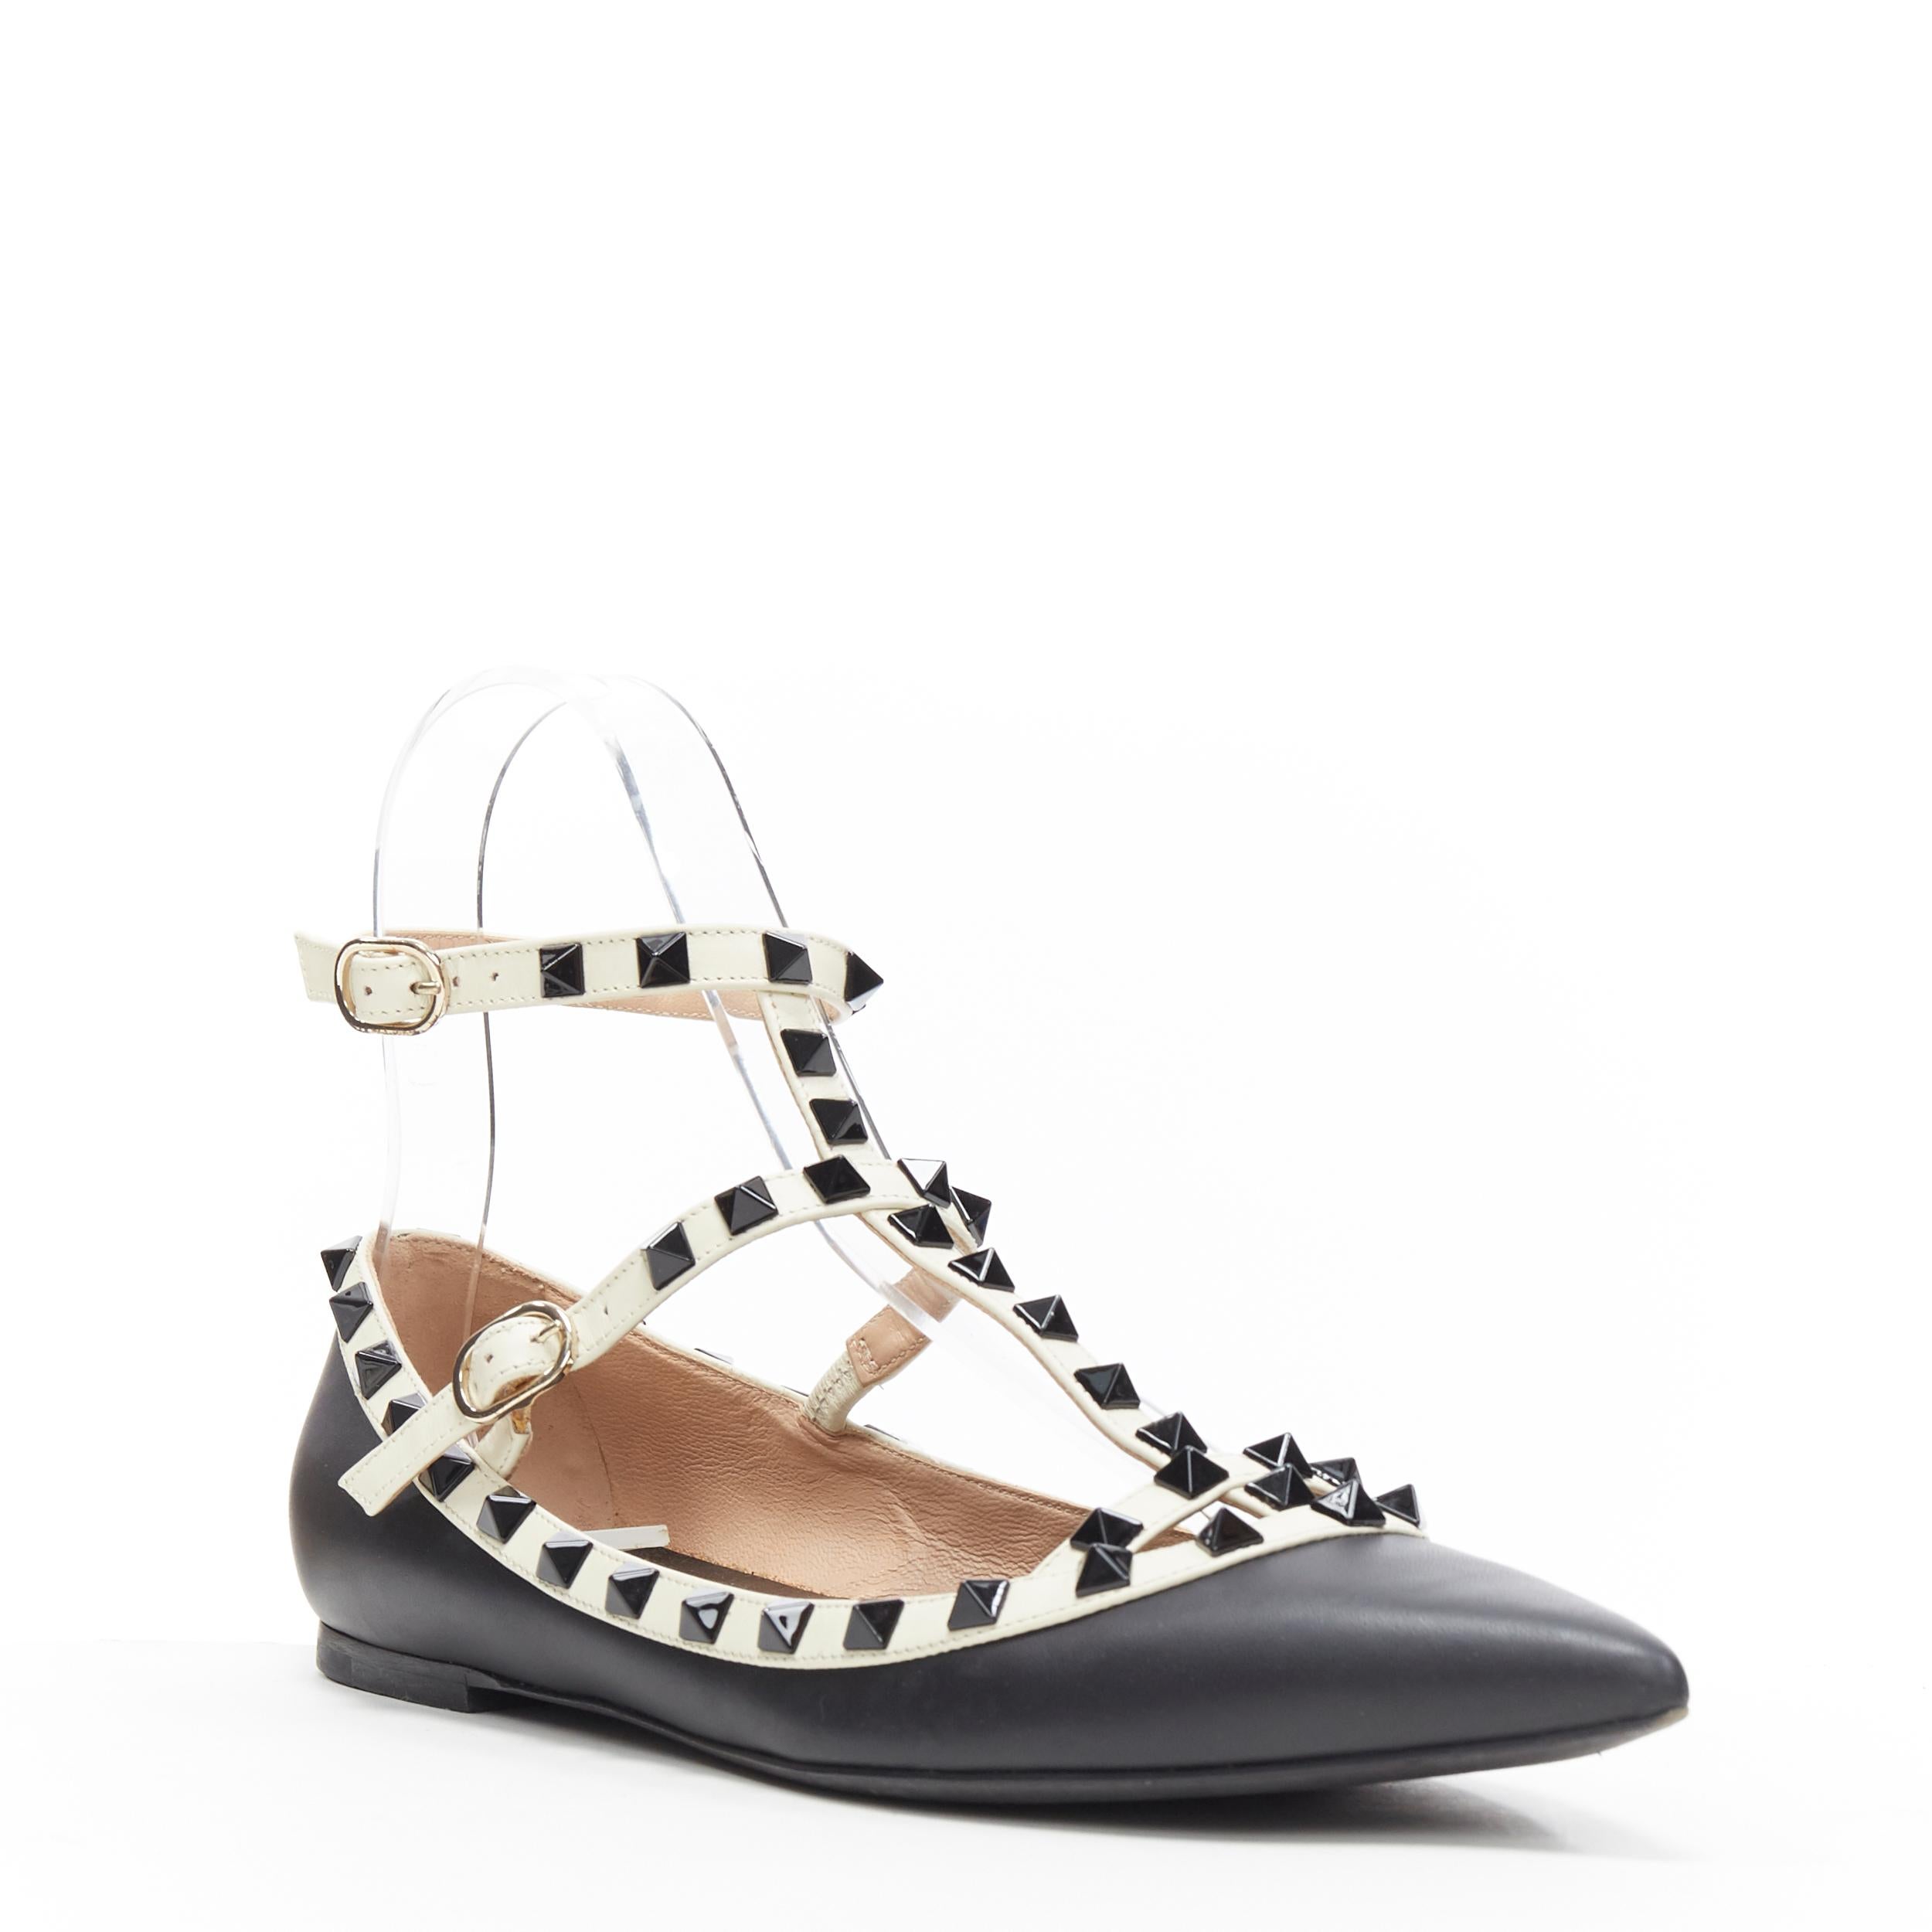 VALENTINO Rockstud black white studded caged strappy pointed flat shoes EU38.5
Brand: Valentino
Designer: Pierpaolo Piccioli
Model Name / Style: Rockstud flats
Material: Leather
Color: Black
Pattern: Solid
Closure: Ankle strap
Extra Detail: Flat